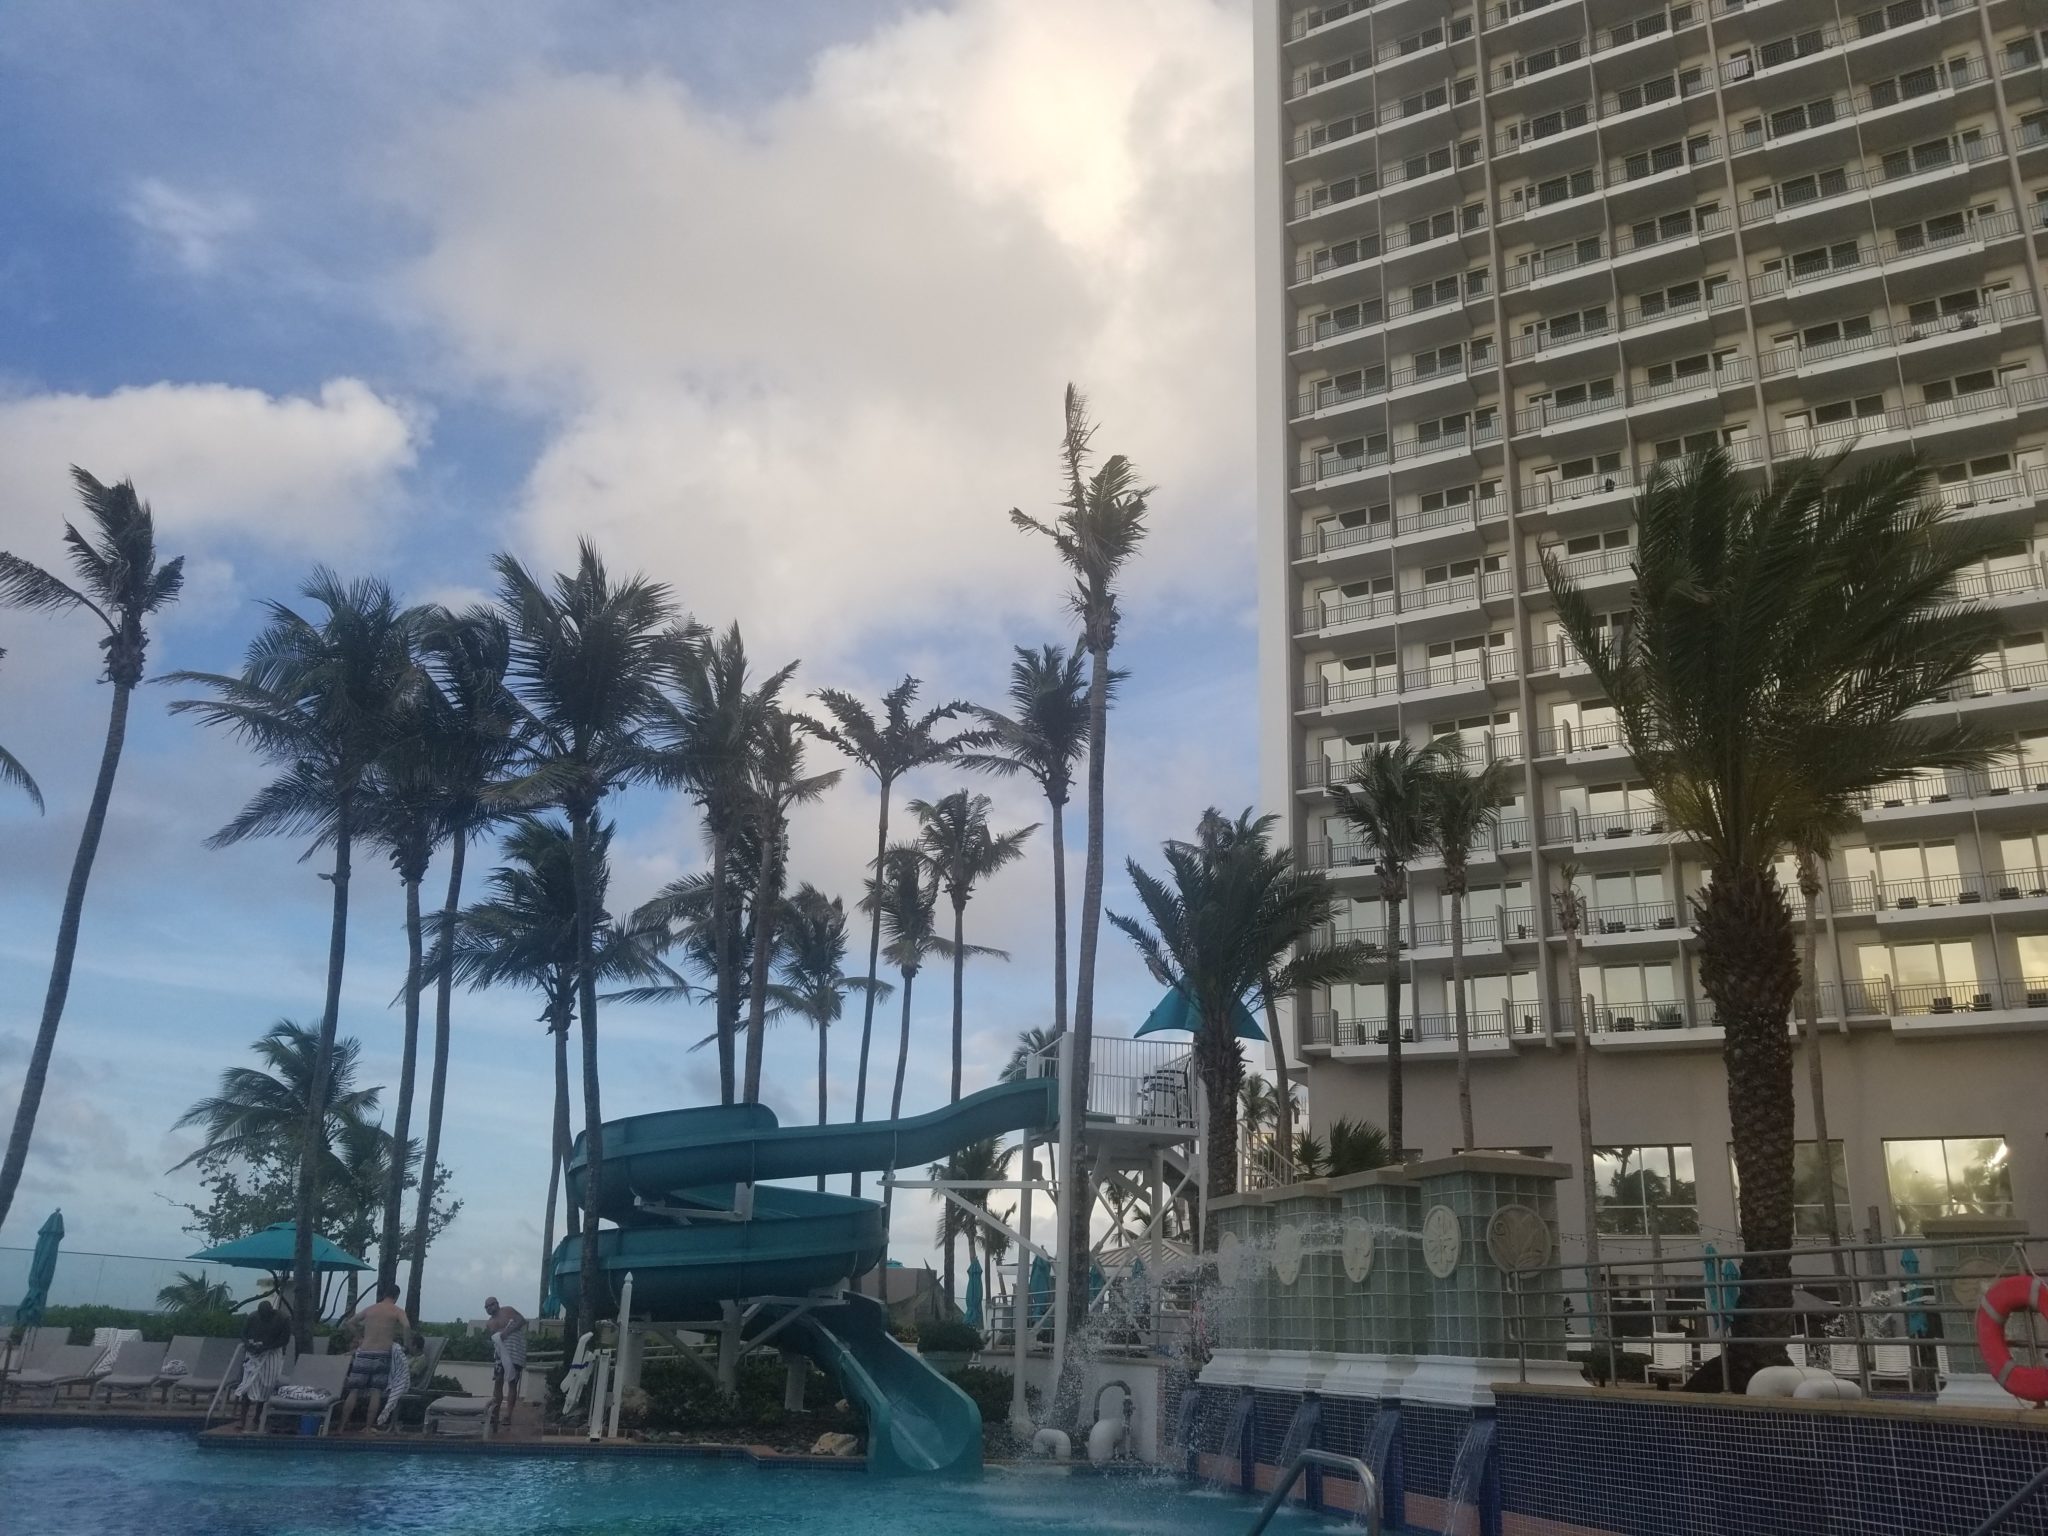 a water slide and palm trees next to a building